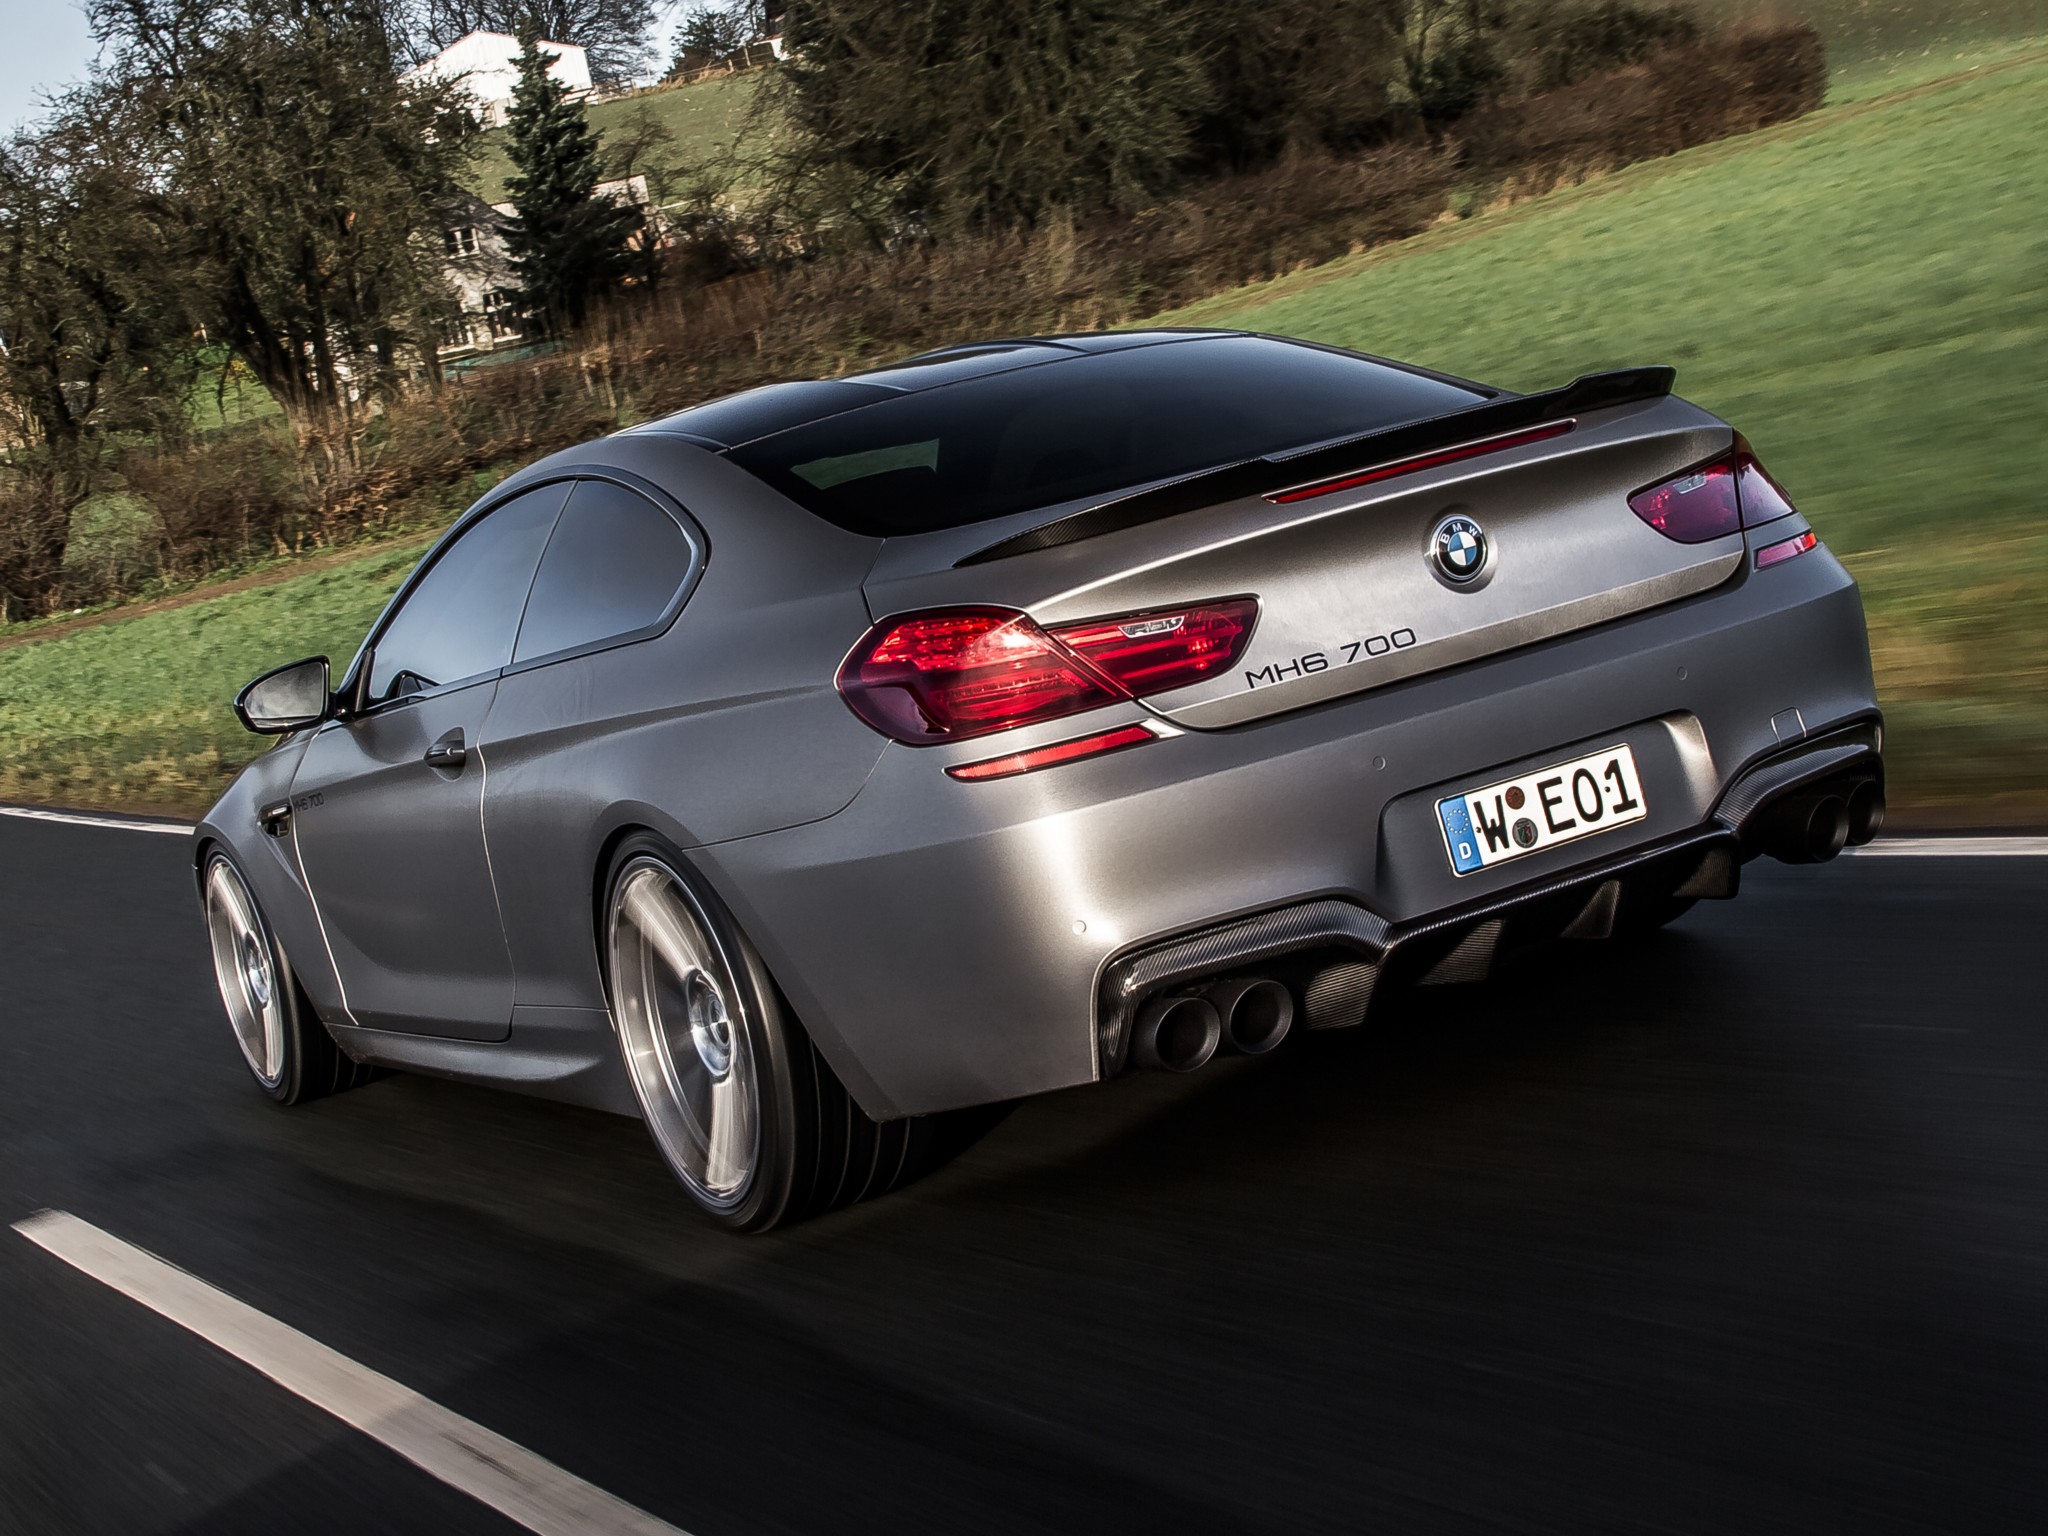 2013, Manhart racing, Bmw, Mh6, 700, Coupe,  f13 , Tuning, Gs Wallpaper